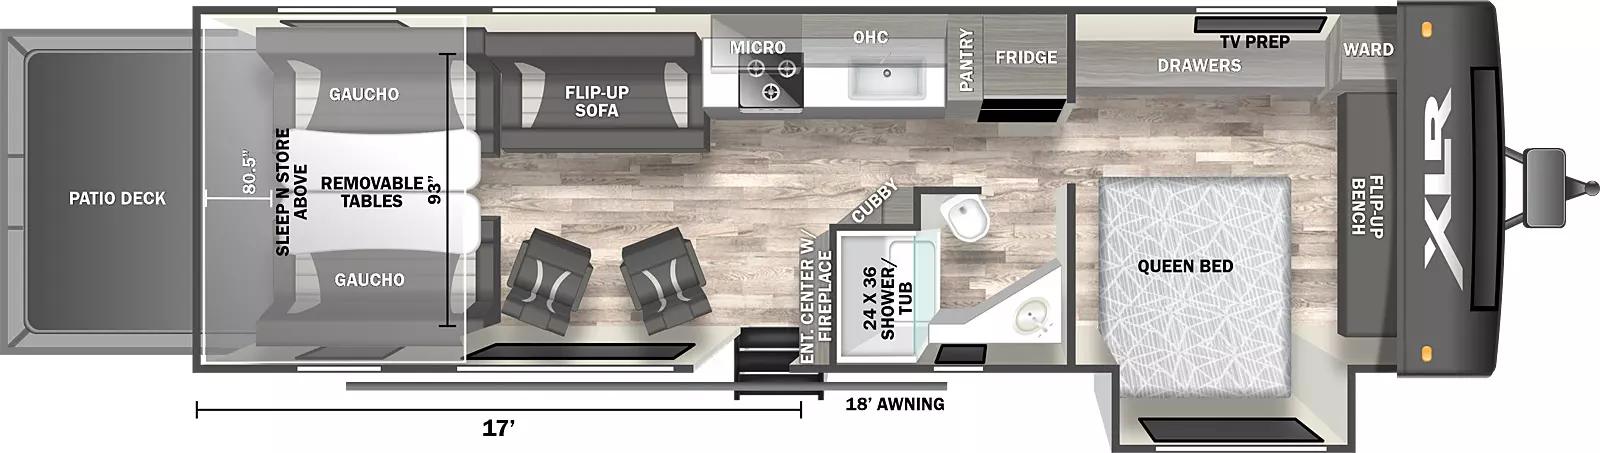 The 3517 has one slideout and one entry. Exterior features include 18 foot awning, and rear ramp door patio deck. Interior layout front to back: front flip-up bench and wardrobe, off-door side drawers and TV prep, door side queen bed slideout; off-door side refrigerator, pantry, kitchen counter with sink, overhead cabinet, cooktop and microwave; door side full bathroom; cubby and entertainment center with fireplace along inner wall; door side entry and two chairs; off-door side flip-up sofa; rear opposing gaucho couches with removeable tables and sleep n store above. Garage dimensions: 17 feet from rear to entertainment center; 93 inches from door side to off-door side; 80. 5 inch height.